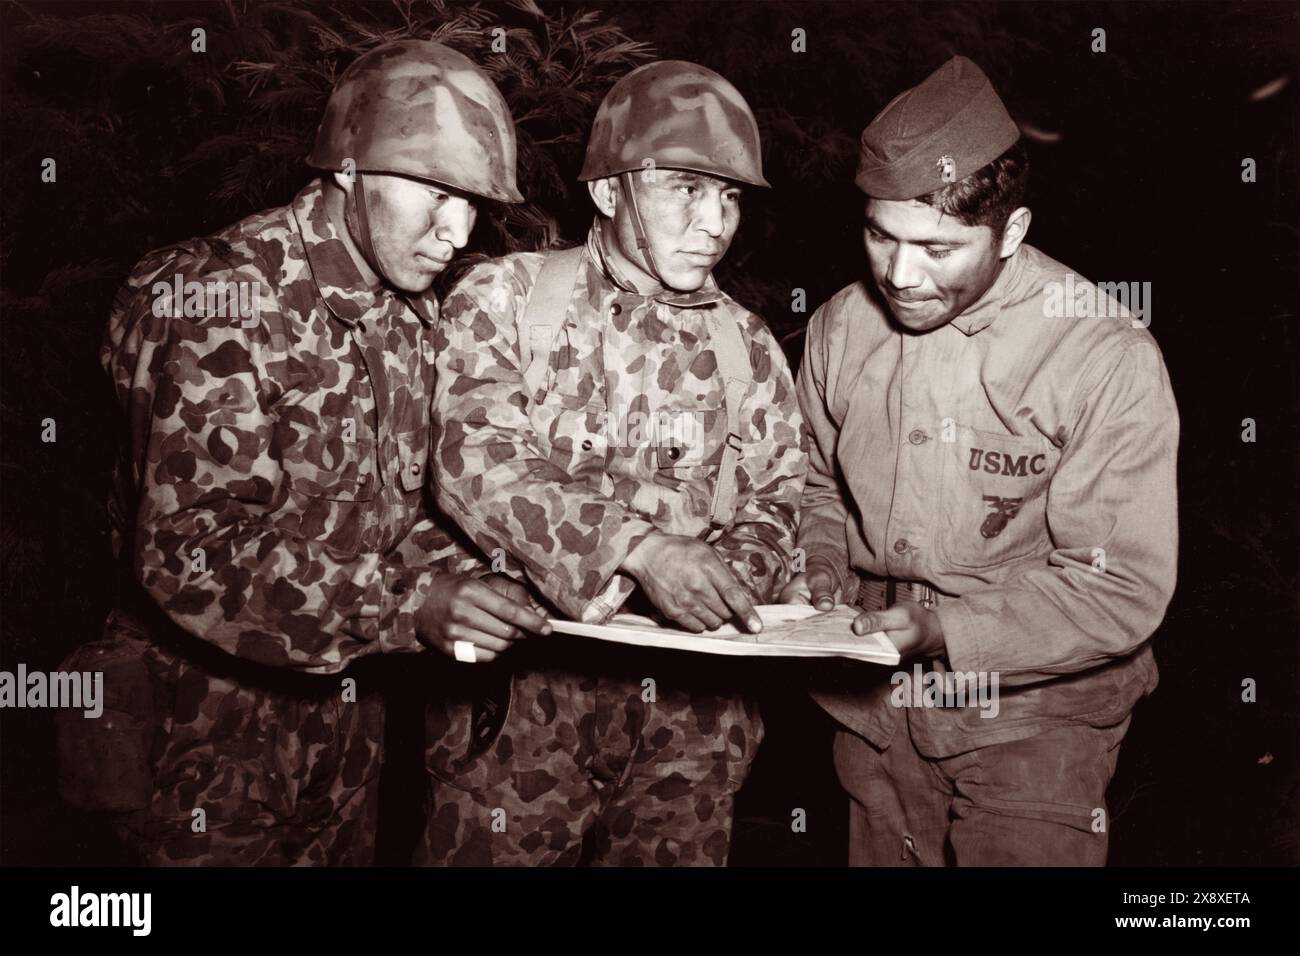 Navajo code talkers, members of the signal company and attached with the 1st Marine Division in the Southwest Pacific, study a night problem at the Amphibious Scout School conducted by the Intelligence Section during World War II in 1943. Stock Photo